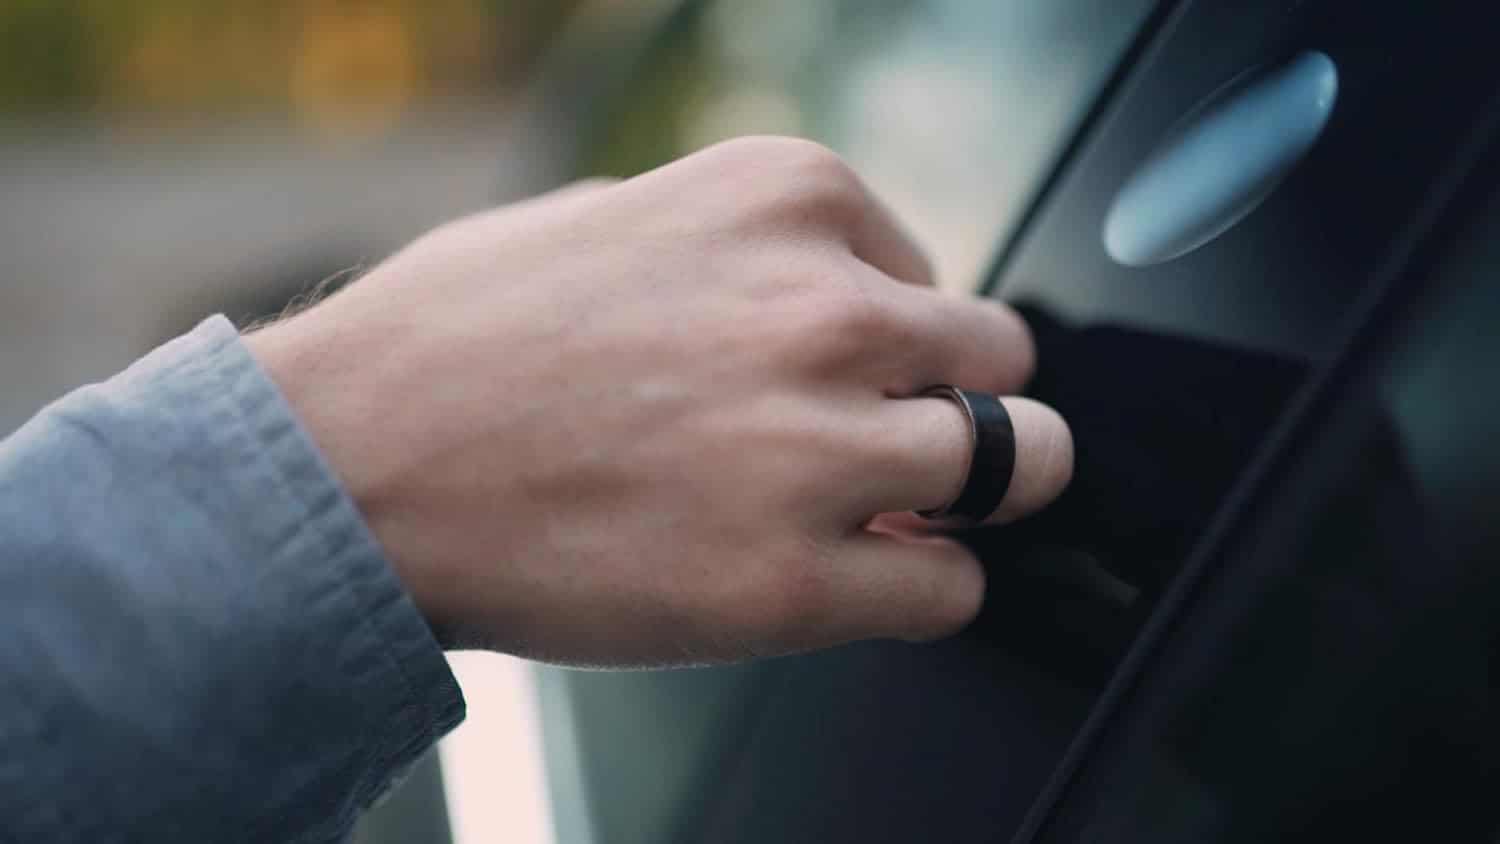 CNICK Tesla Key Ring Accessories: The Ultimate RFID Smart Ring Review